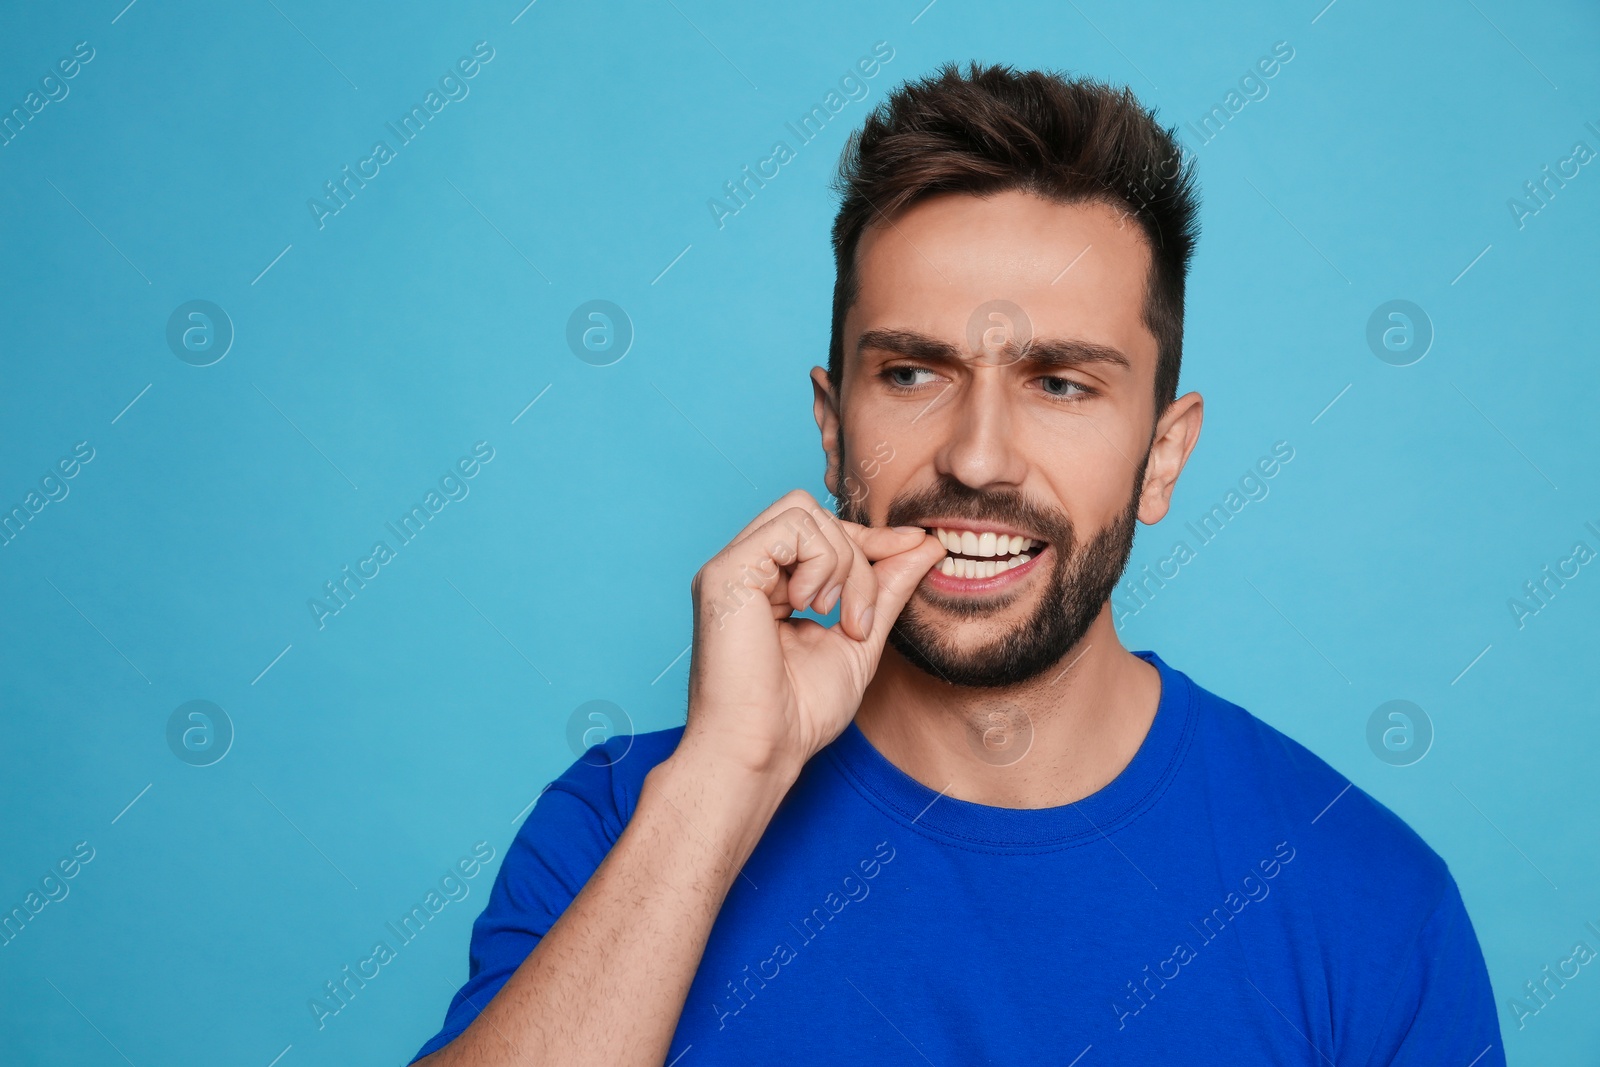 Photo of Man biting his nails on light blue background. Space for text